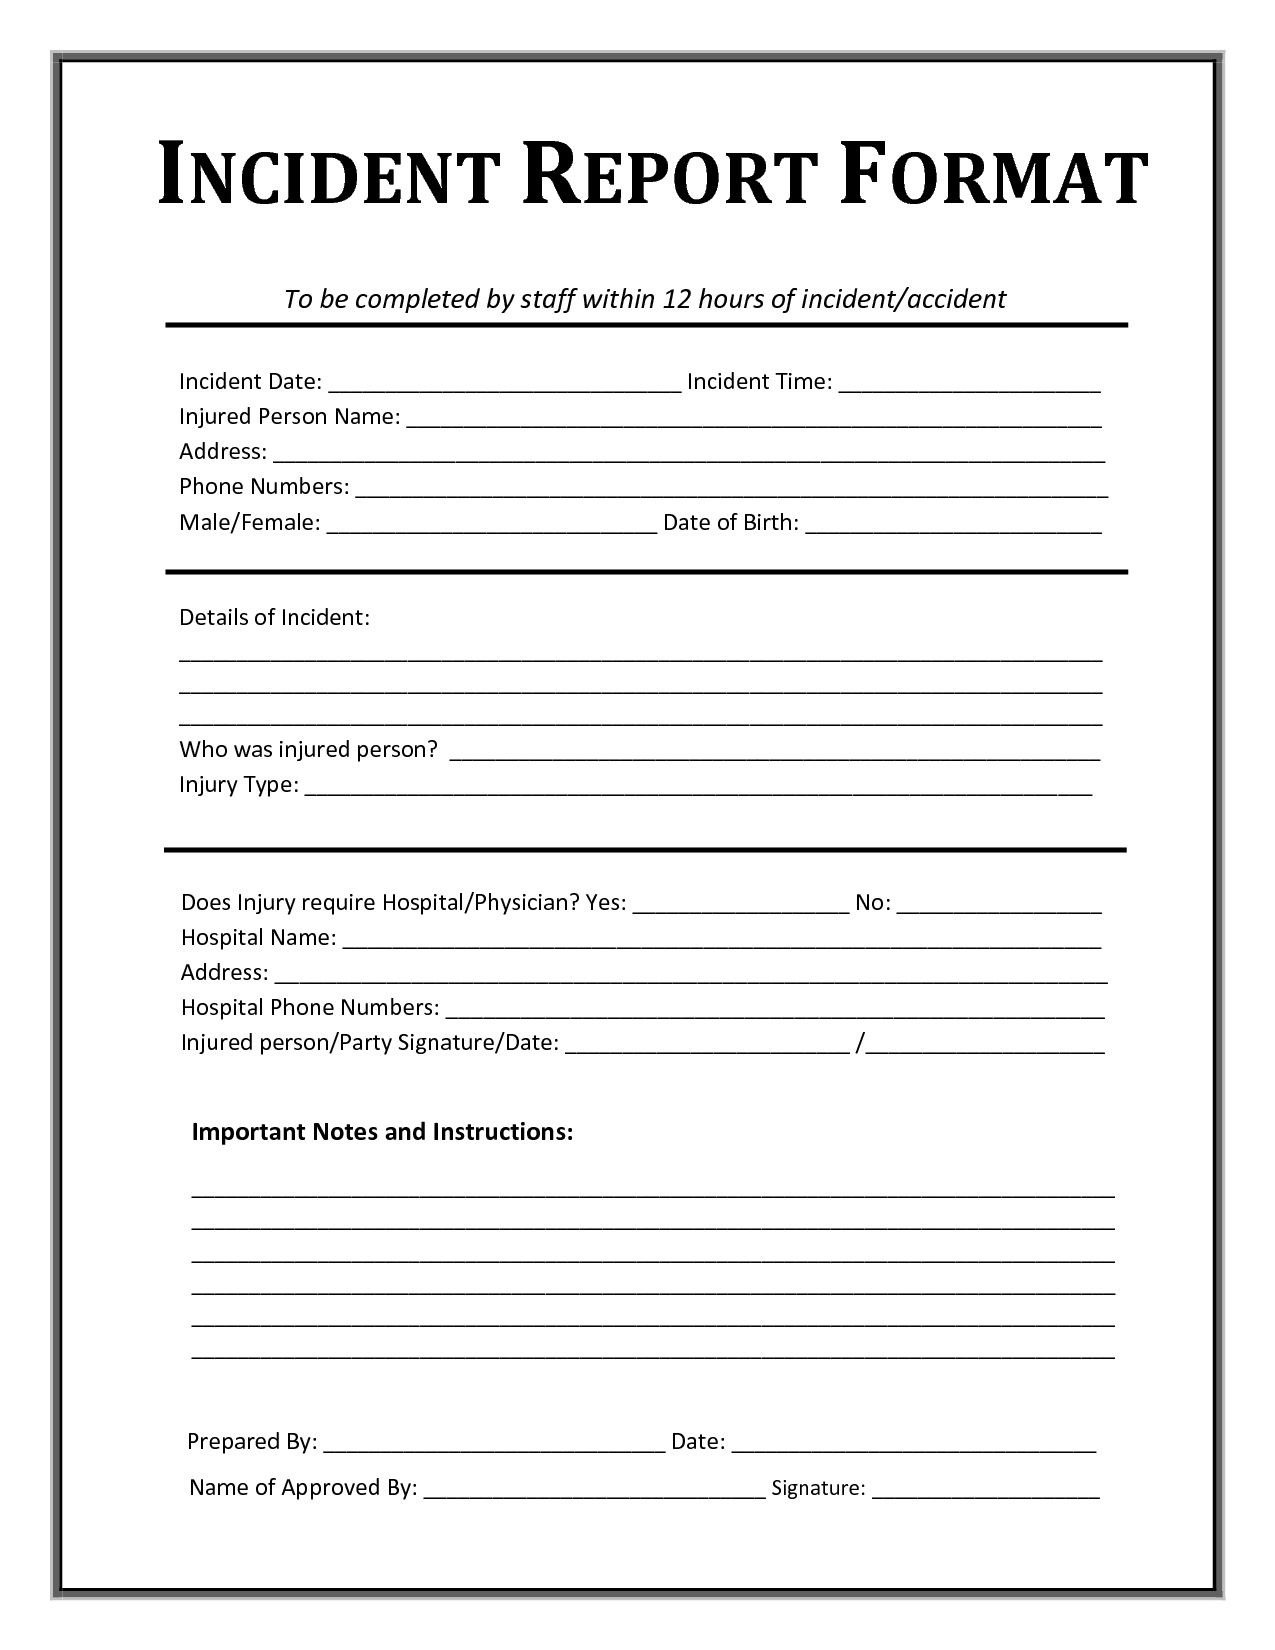 Incident Report Form Template Doc - Atlantaauctionco With Incident Report Form Template Doc